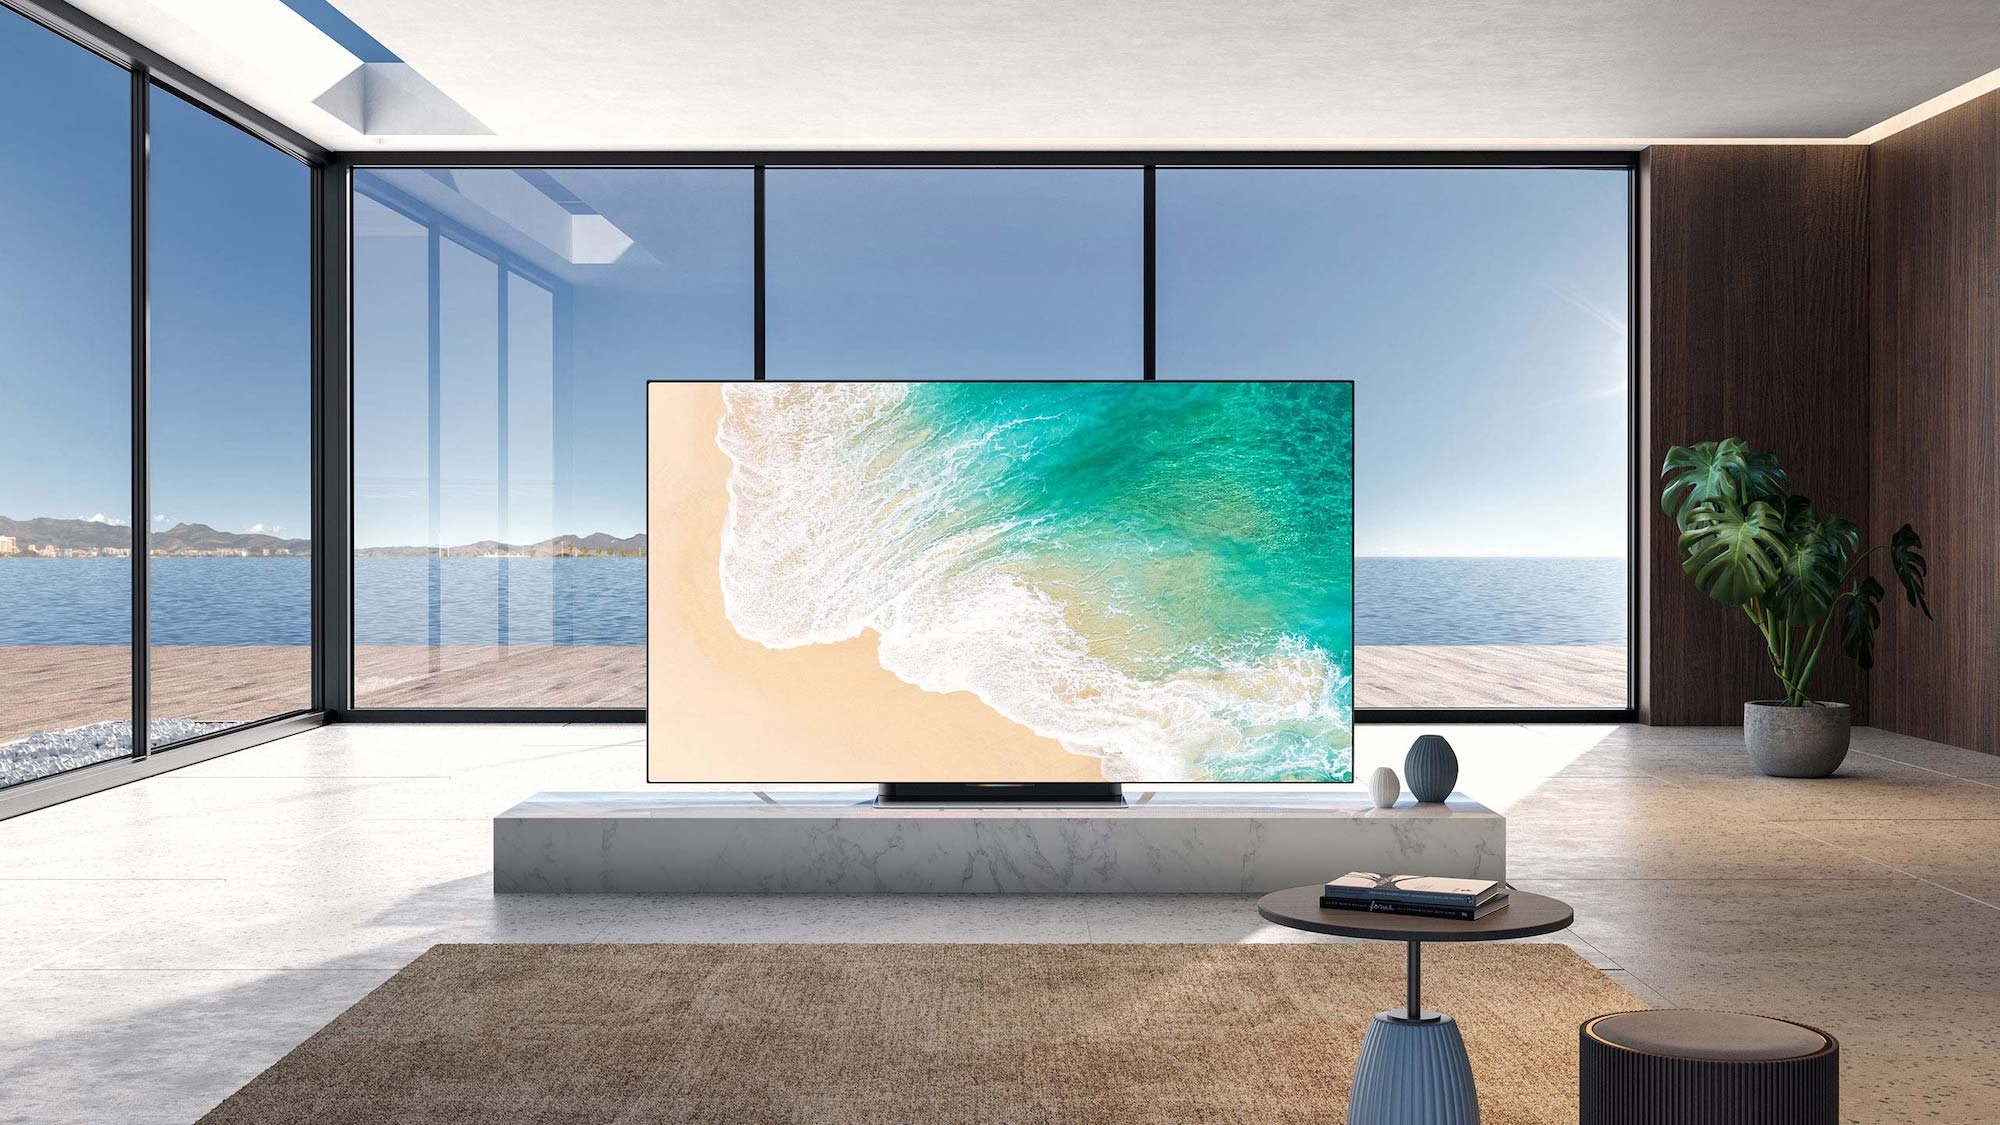 Xiaomi TV Master 65-Inch OLED Television uses self-luminous technology instead of backlighting